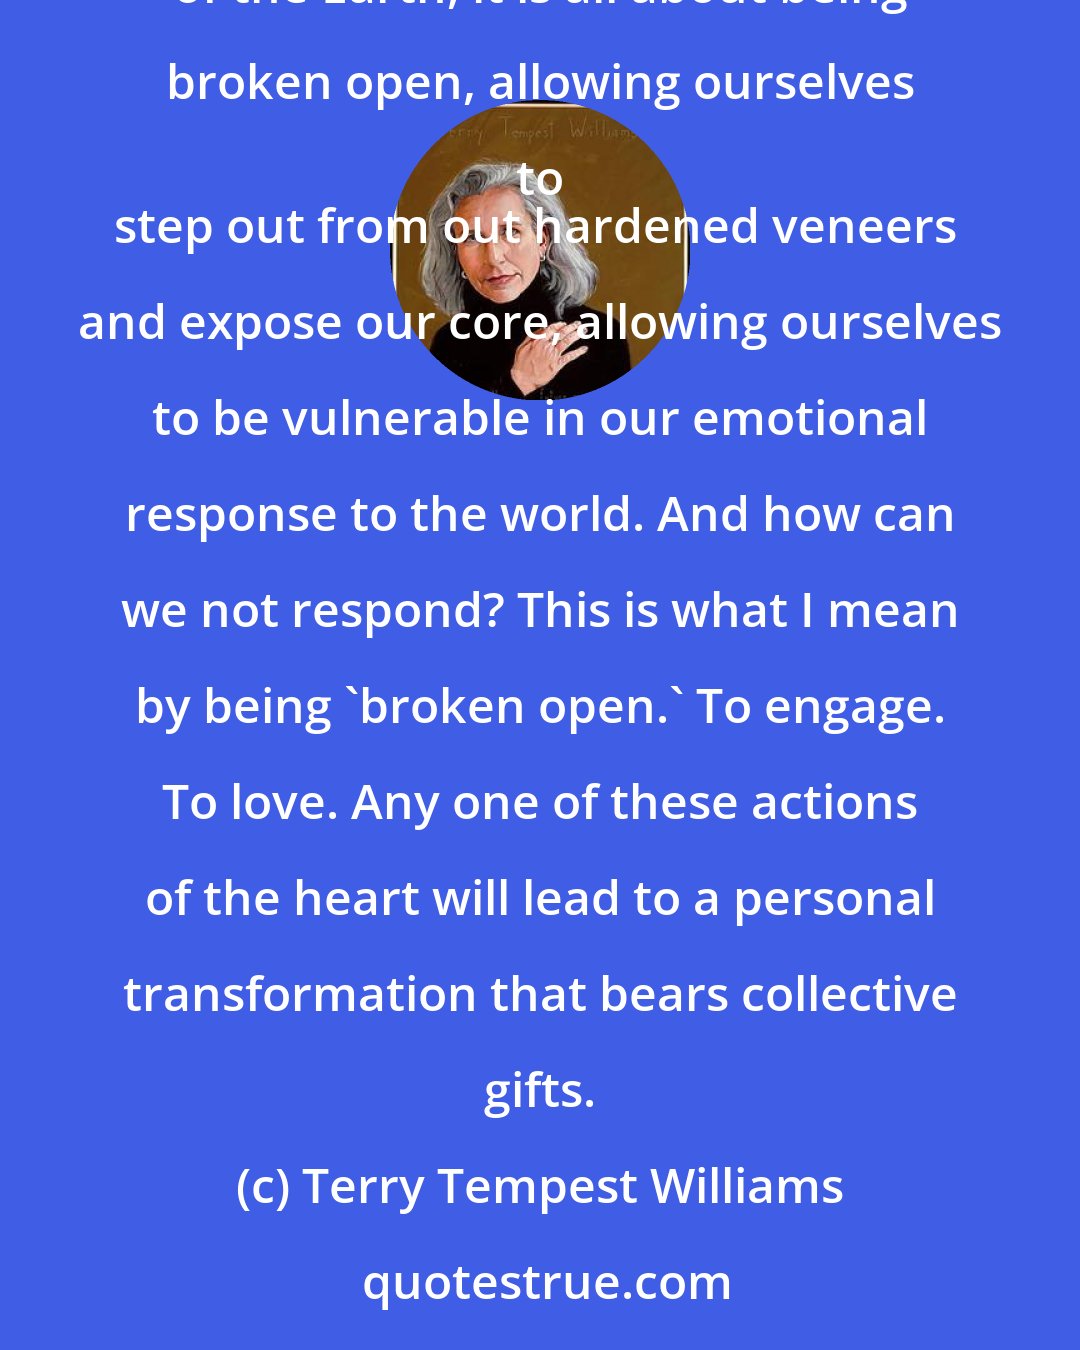 Terry Tempest Williams: If we are at all sensitive to the life around us, to one another's pains and joys, 
to the beauty and fragility of the Earth, it is all about being broken open, allowing ourselves to 
step out from out hardened veneers and expose our core, allowing ourselves to be vulnerable in our emotional response to the world. And how can we not respond? This is what I mean by being 'broken open.' To engage. To love. Any one of these actions of the heart will lead to a personal transformation that bears collective gifts.